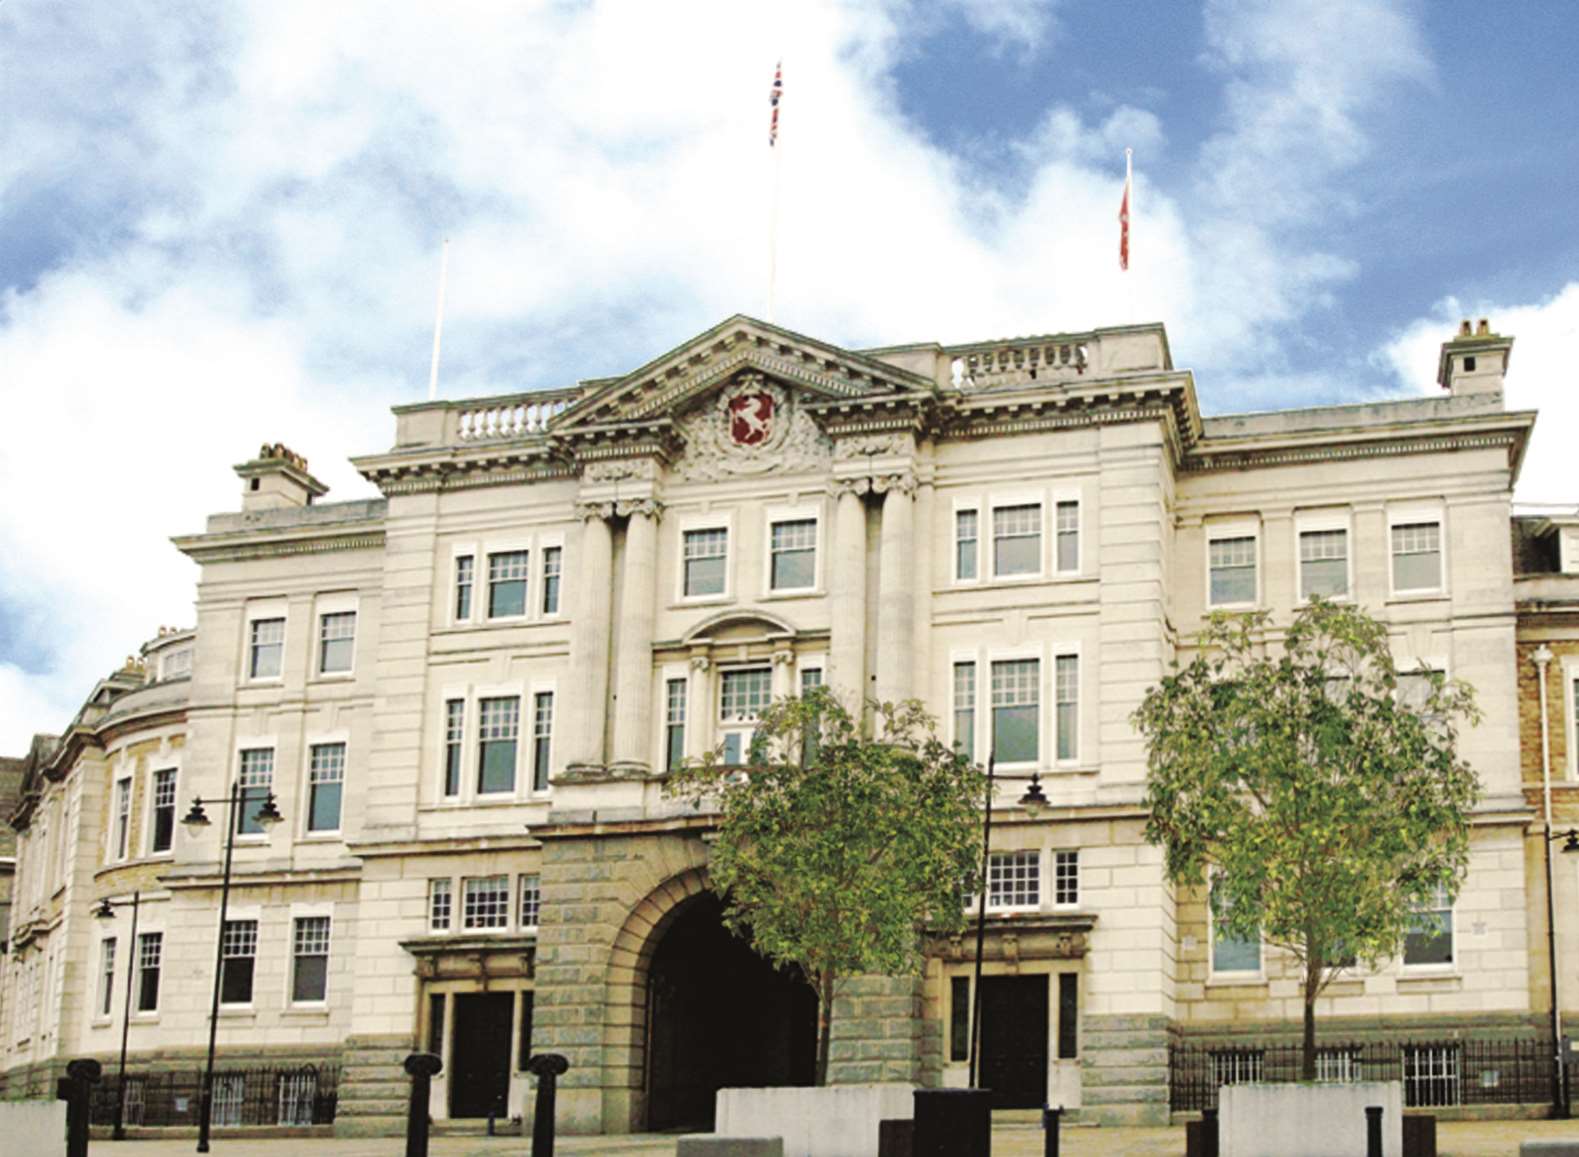 County Hall in Maidstone, KCC's headquarters